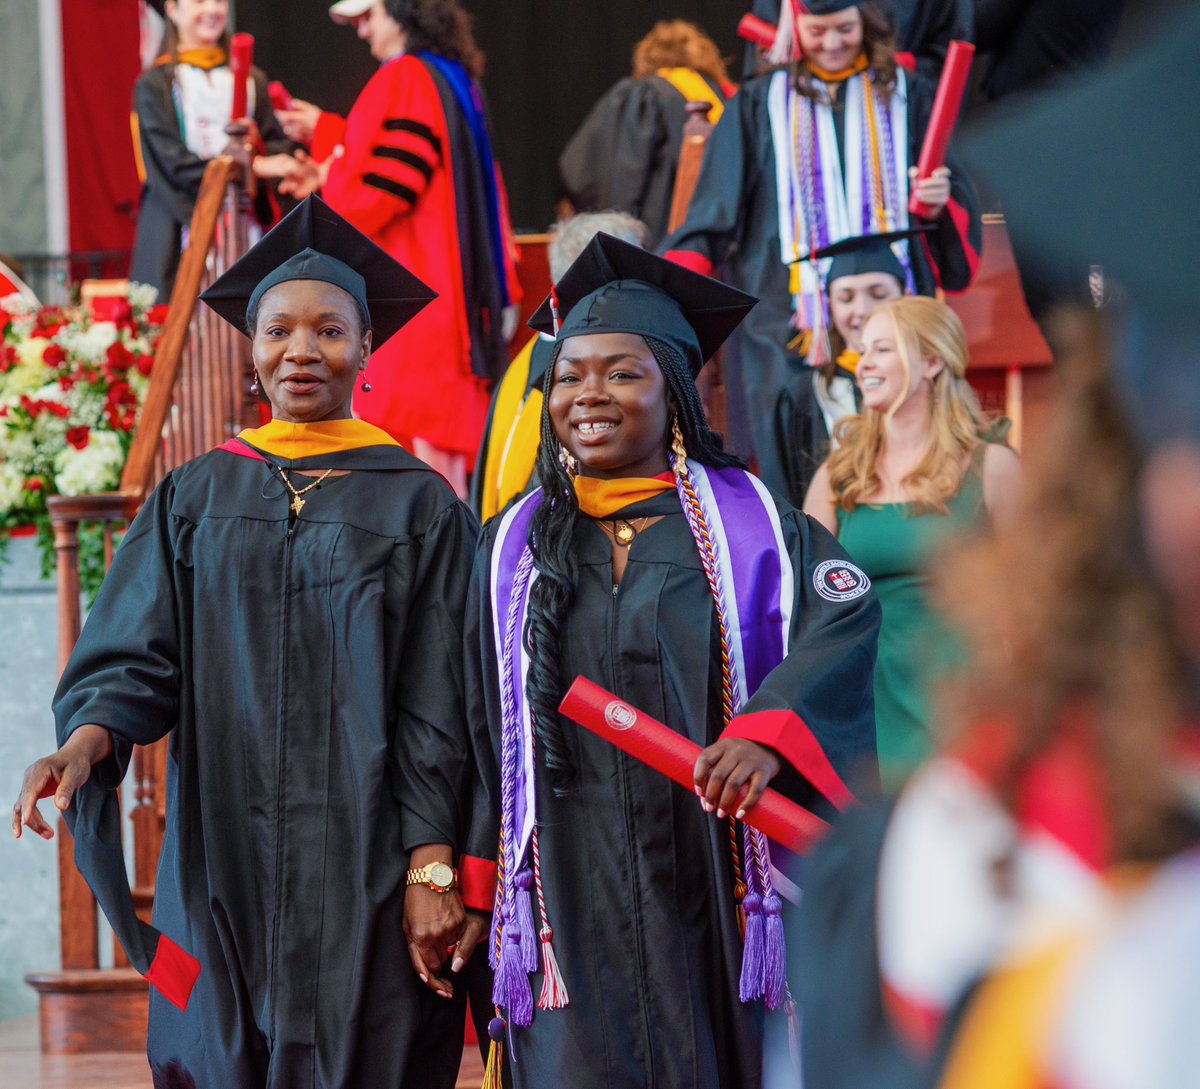 CongratSHUlations to our Undergraduate graduates! 

⬅️ Swipe to relive the special moment. 🎓

Stay tuned for our Graduate Ceremony recap!

#WeAreSHU #GradSHUation